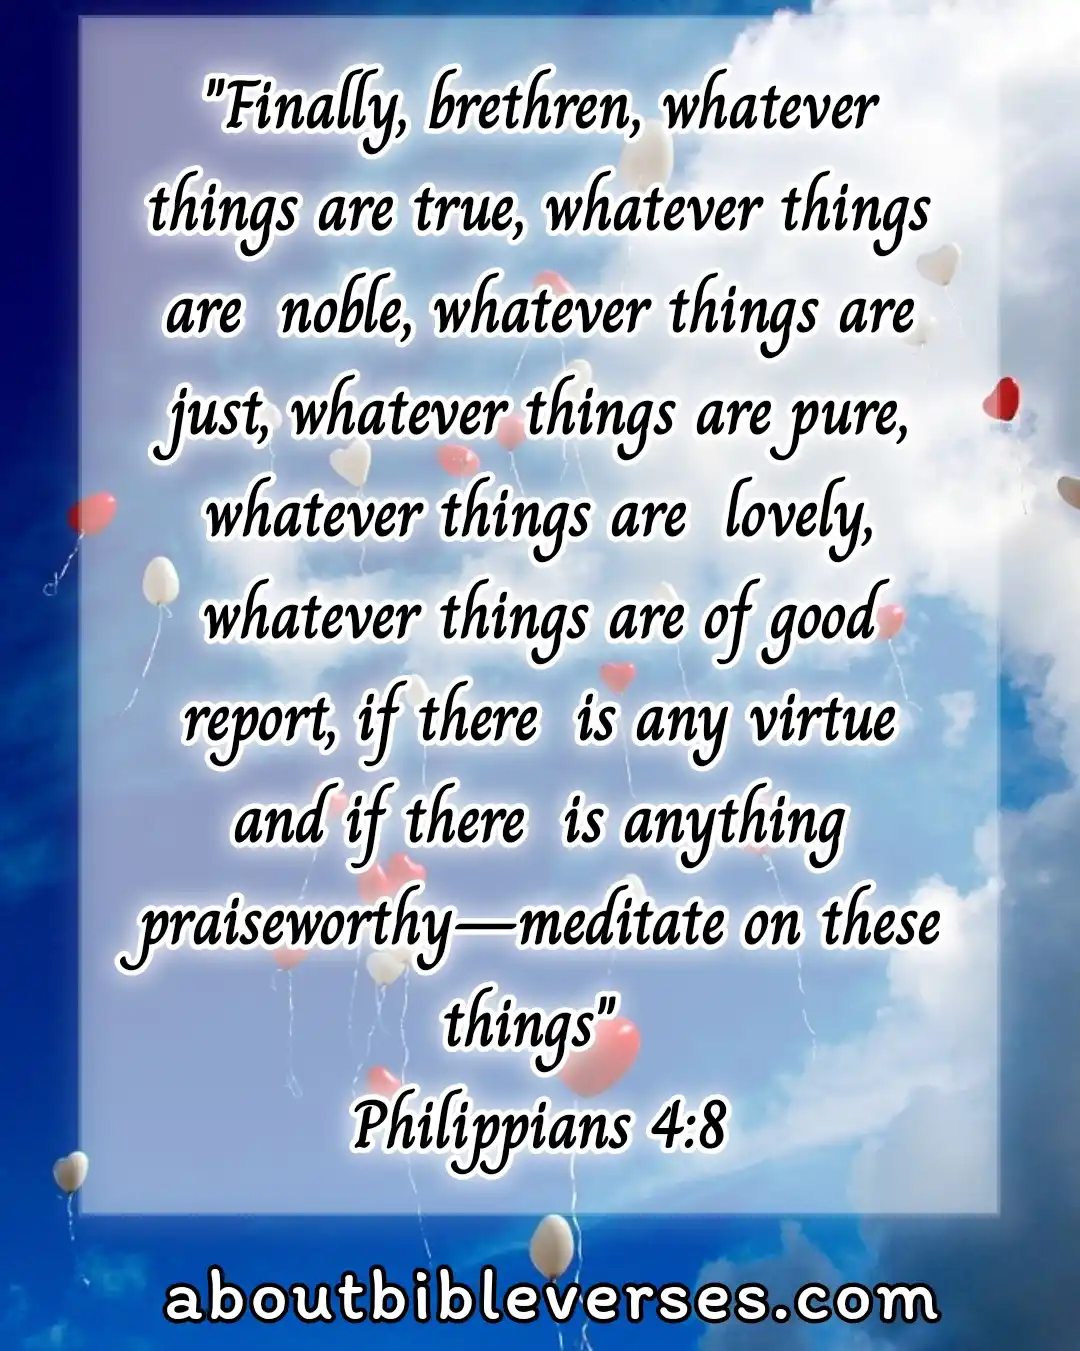 Applying Scripture To Everyday Life (Philippians 4:8)